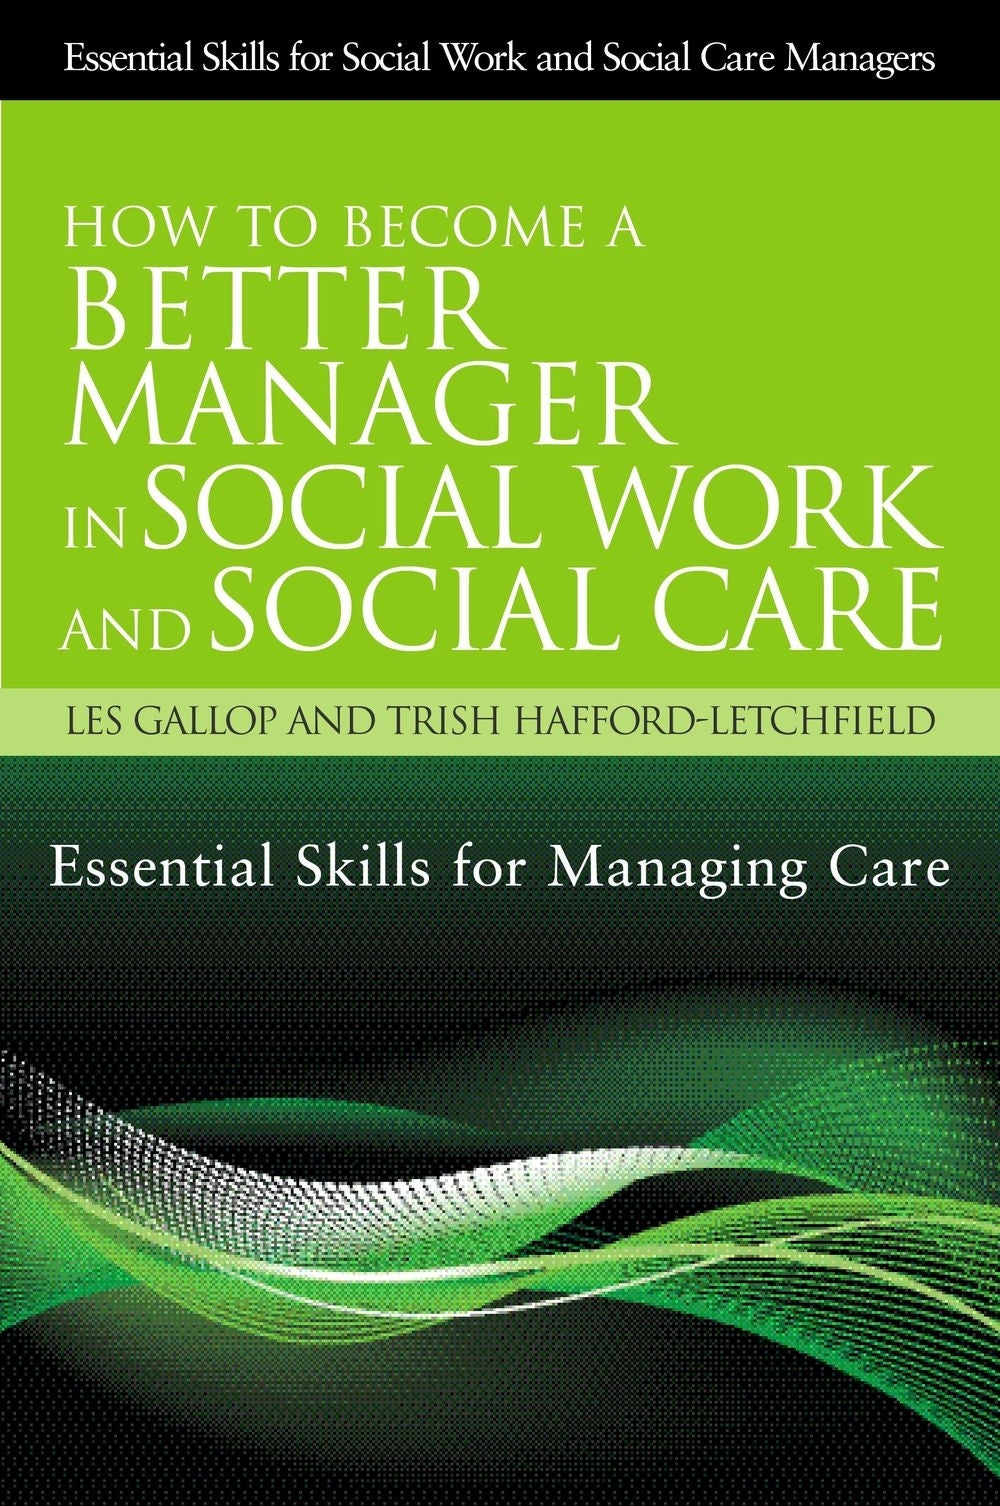 How to Become a Better Manager in Social Work and Social Care by Trish Hafford-Letchfield, Les Gallop, Trish Hafford-Letchfield